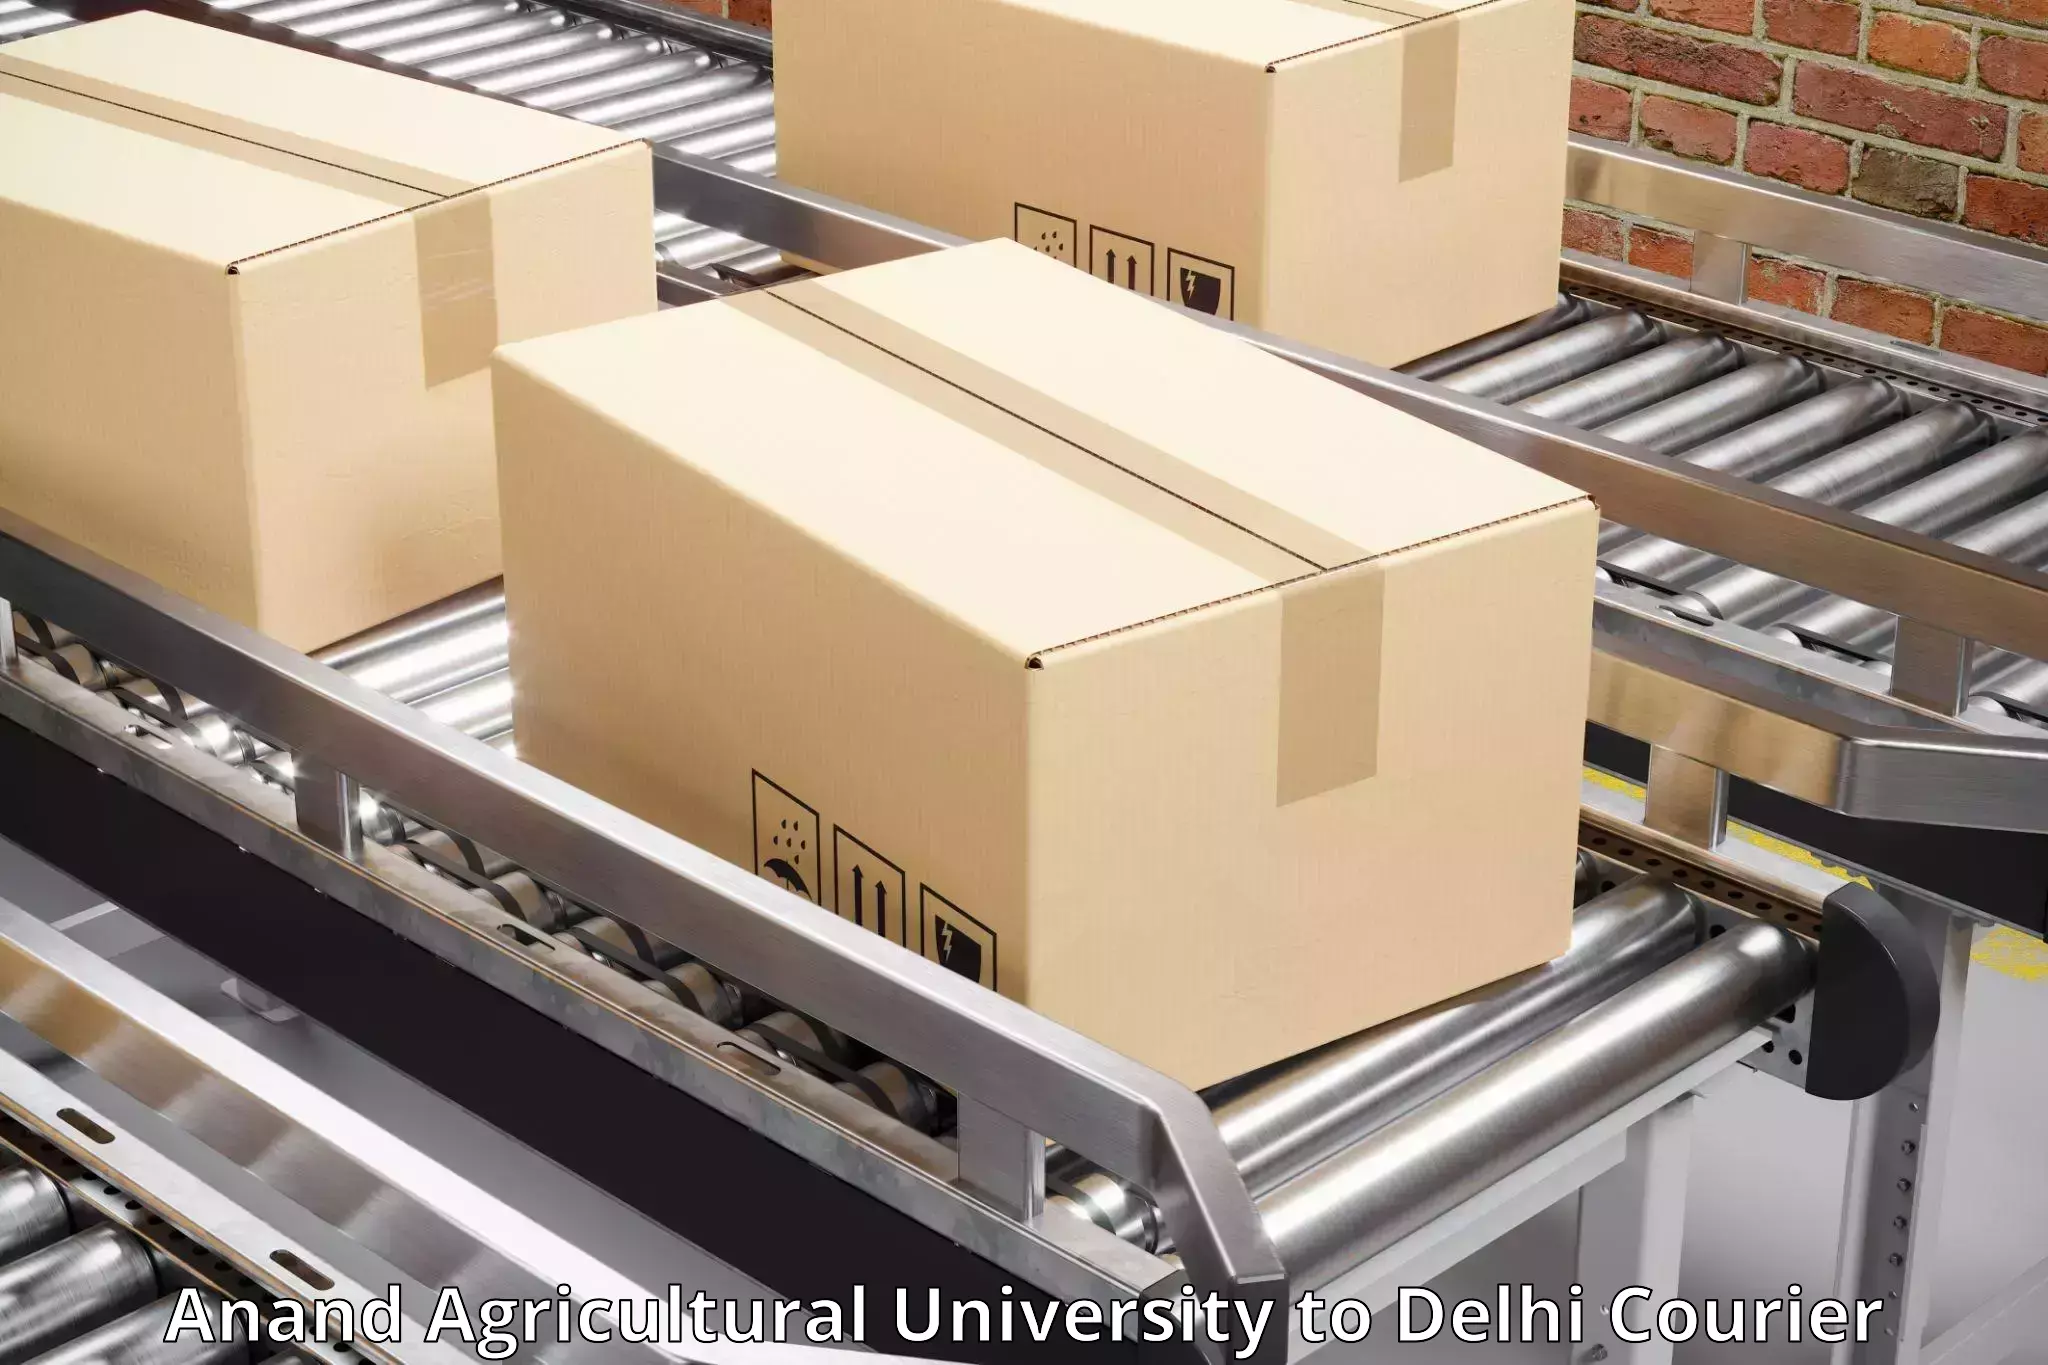 Express delivery solutions Anand Agricultural University to Jawaharlal Nehru University New Delhi